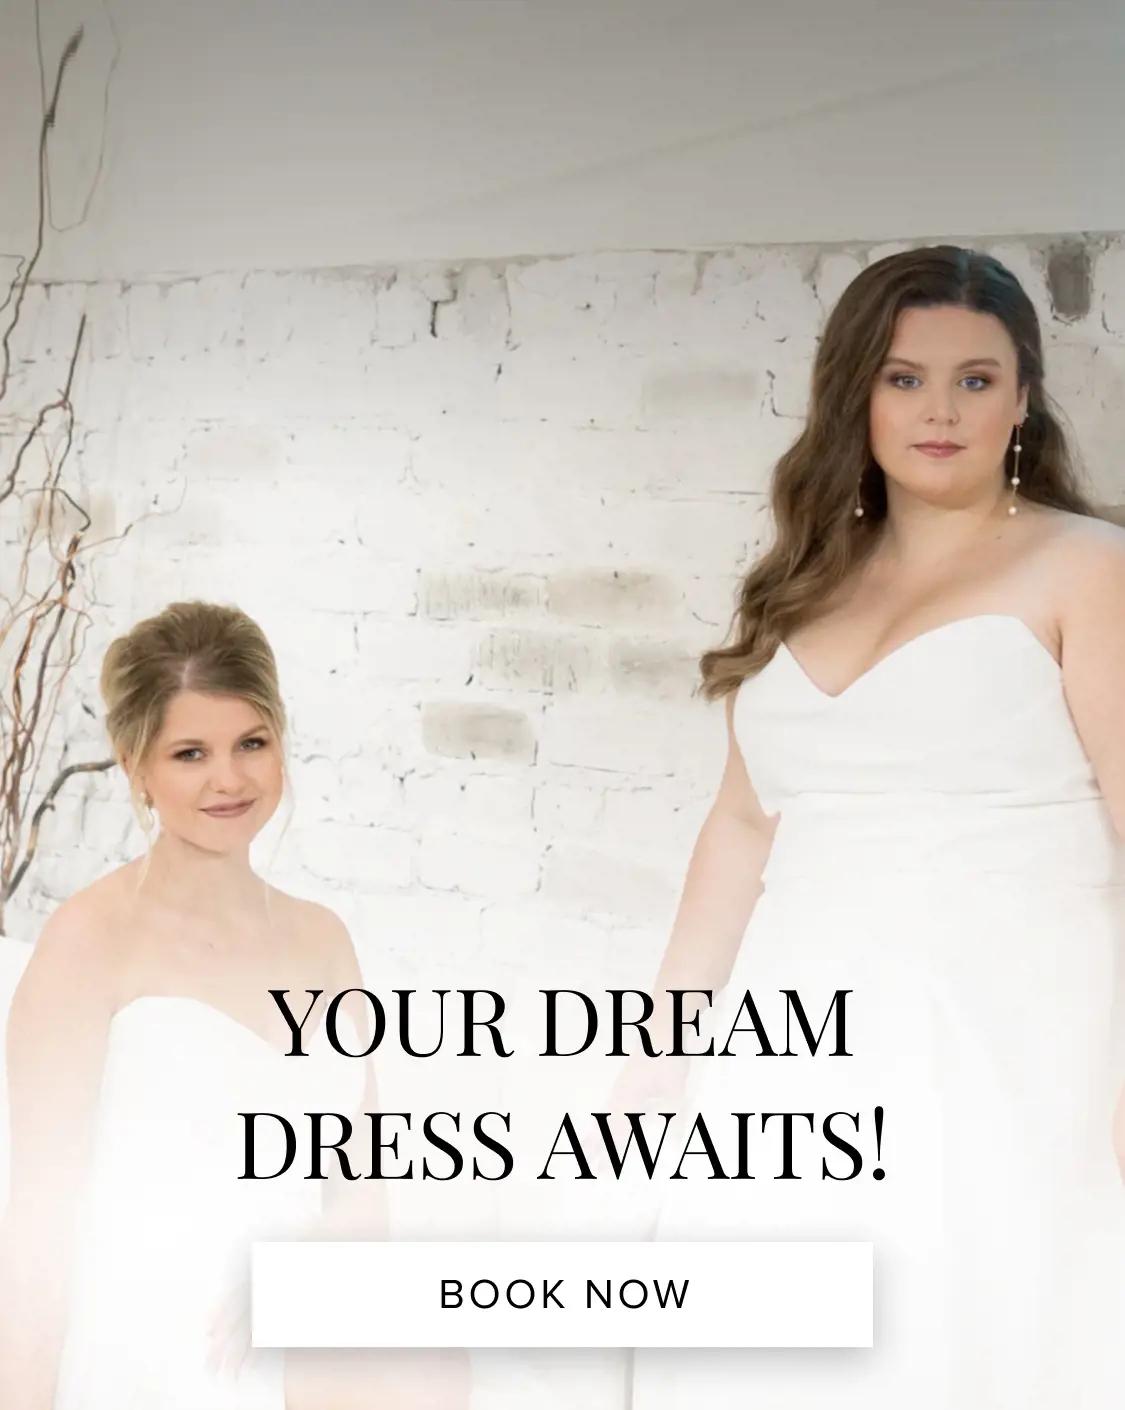 "Your Dream Dress Awaits!" banner for mobile